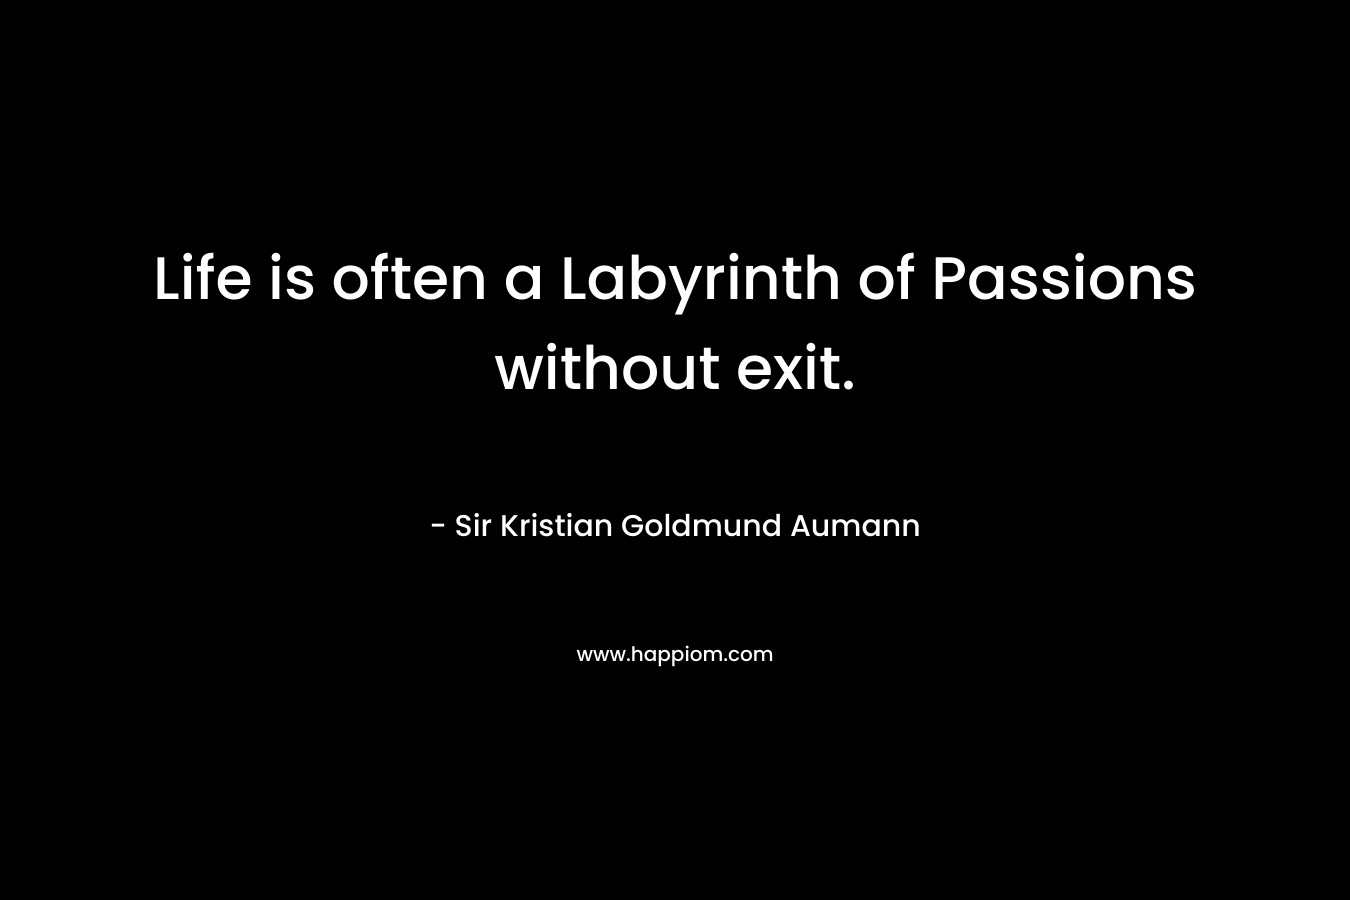 Life is often a Labyrinth of Passions without exit.